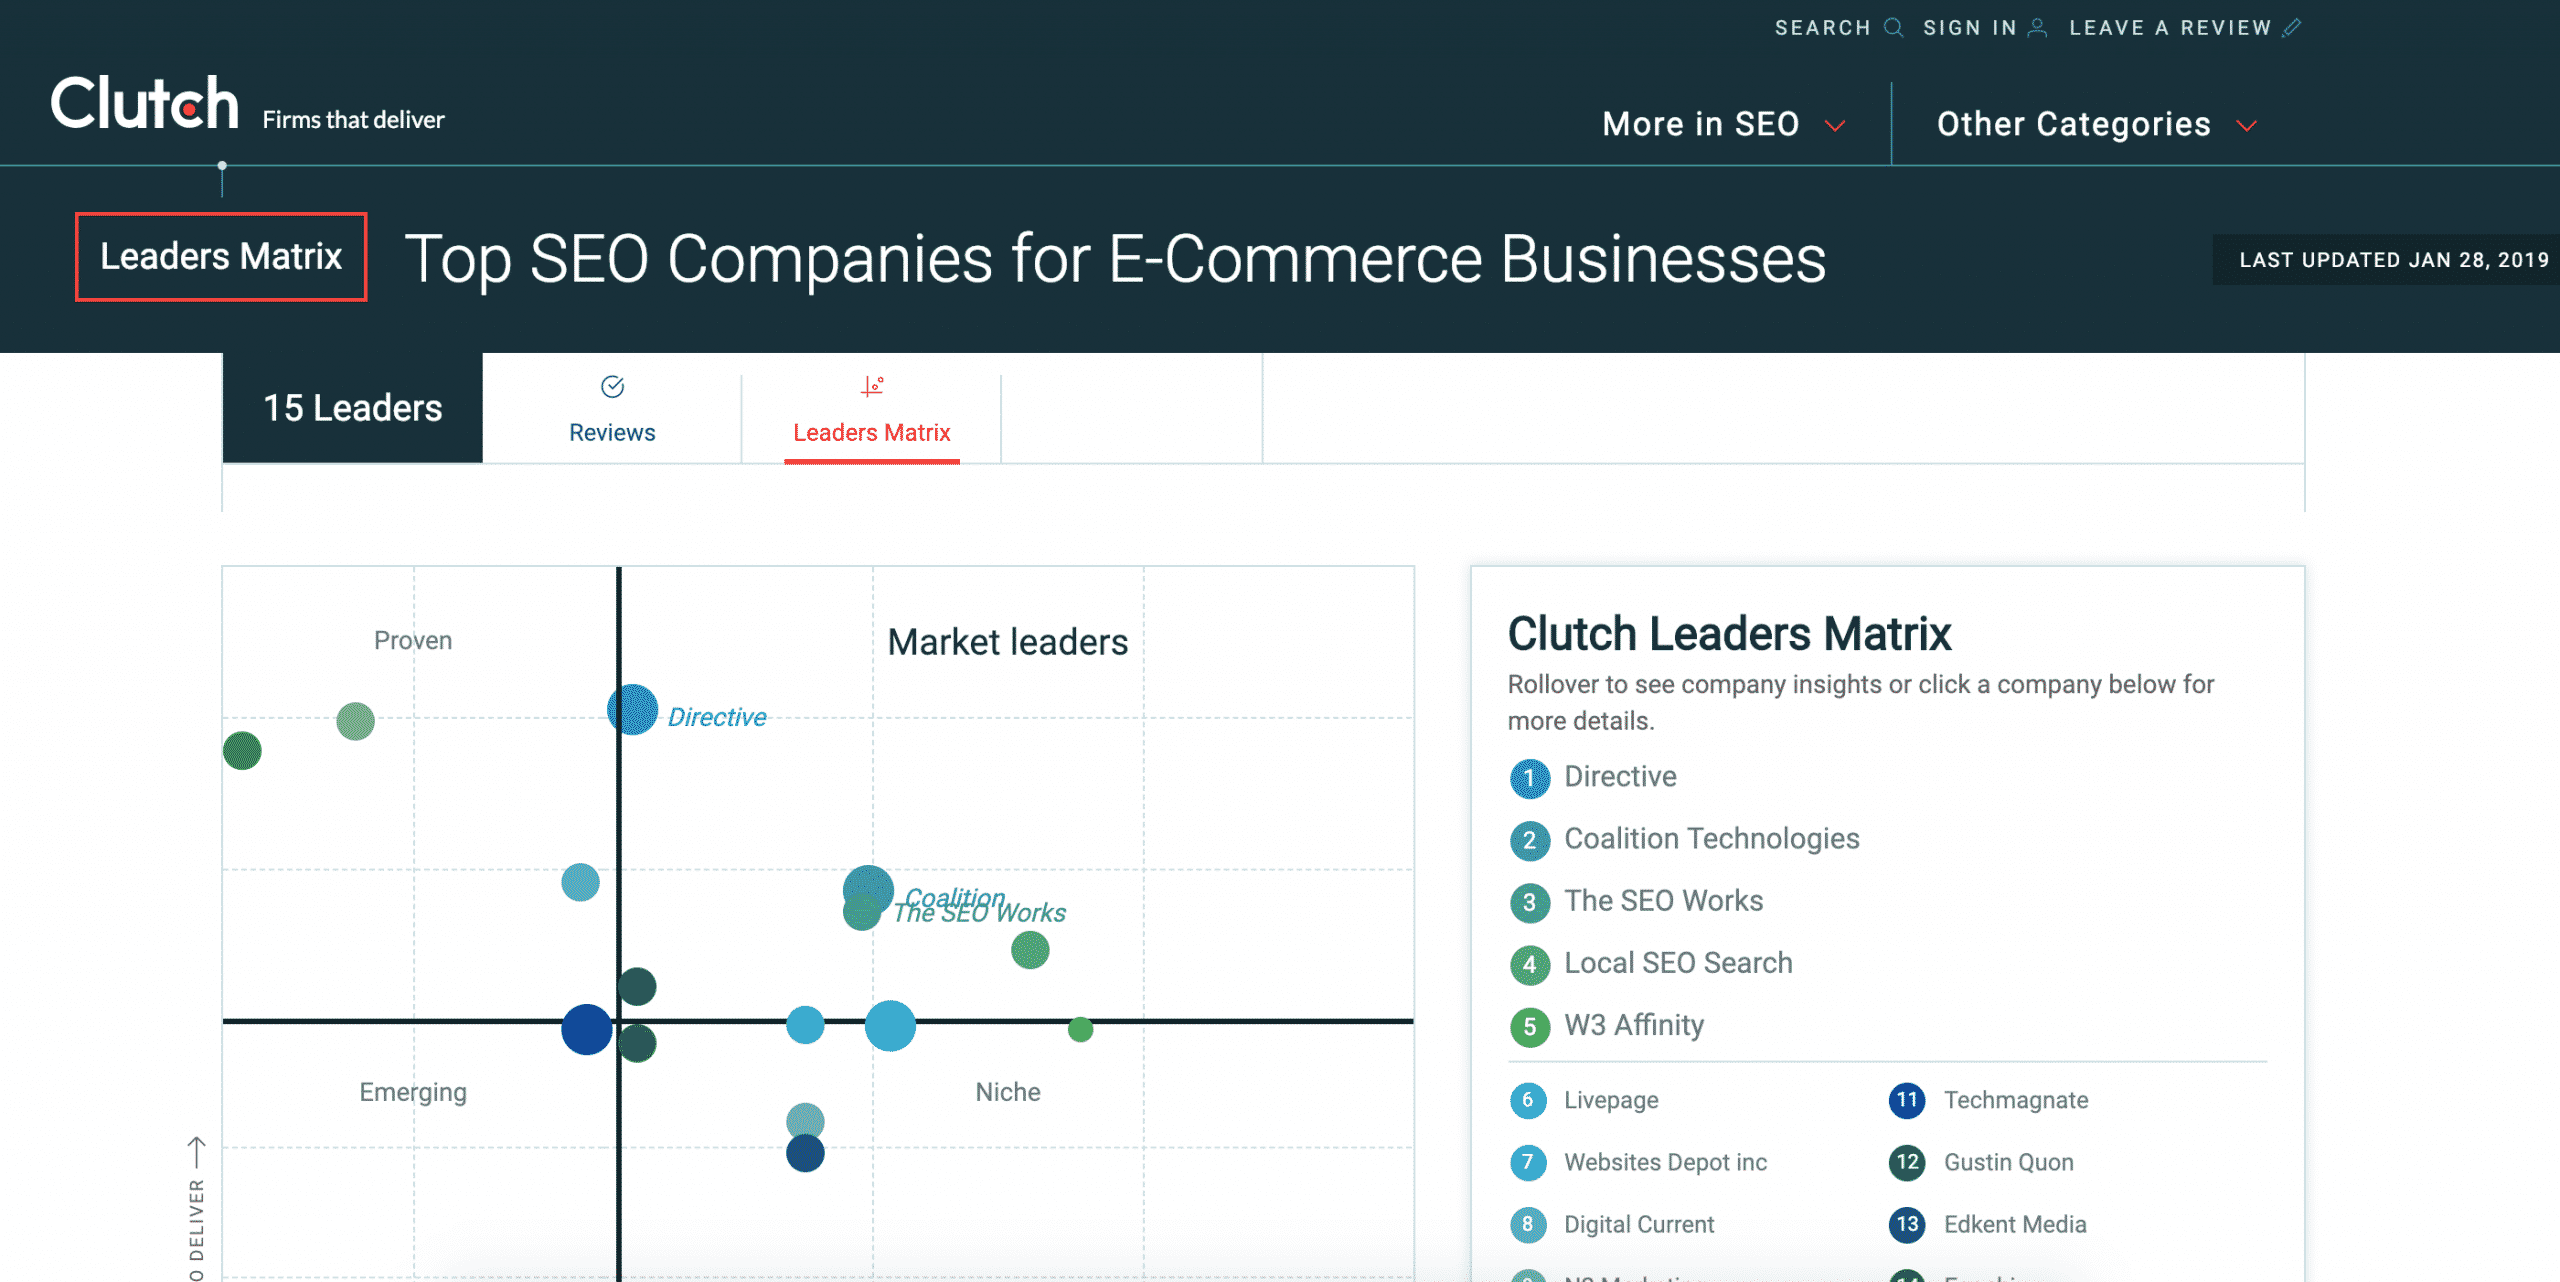 Why Clutch is an Important Resource for Businesses